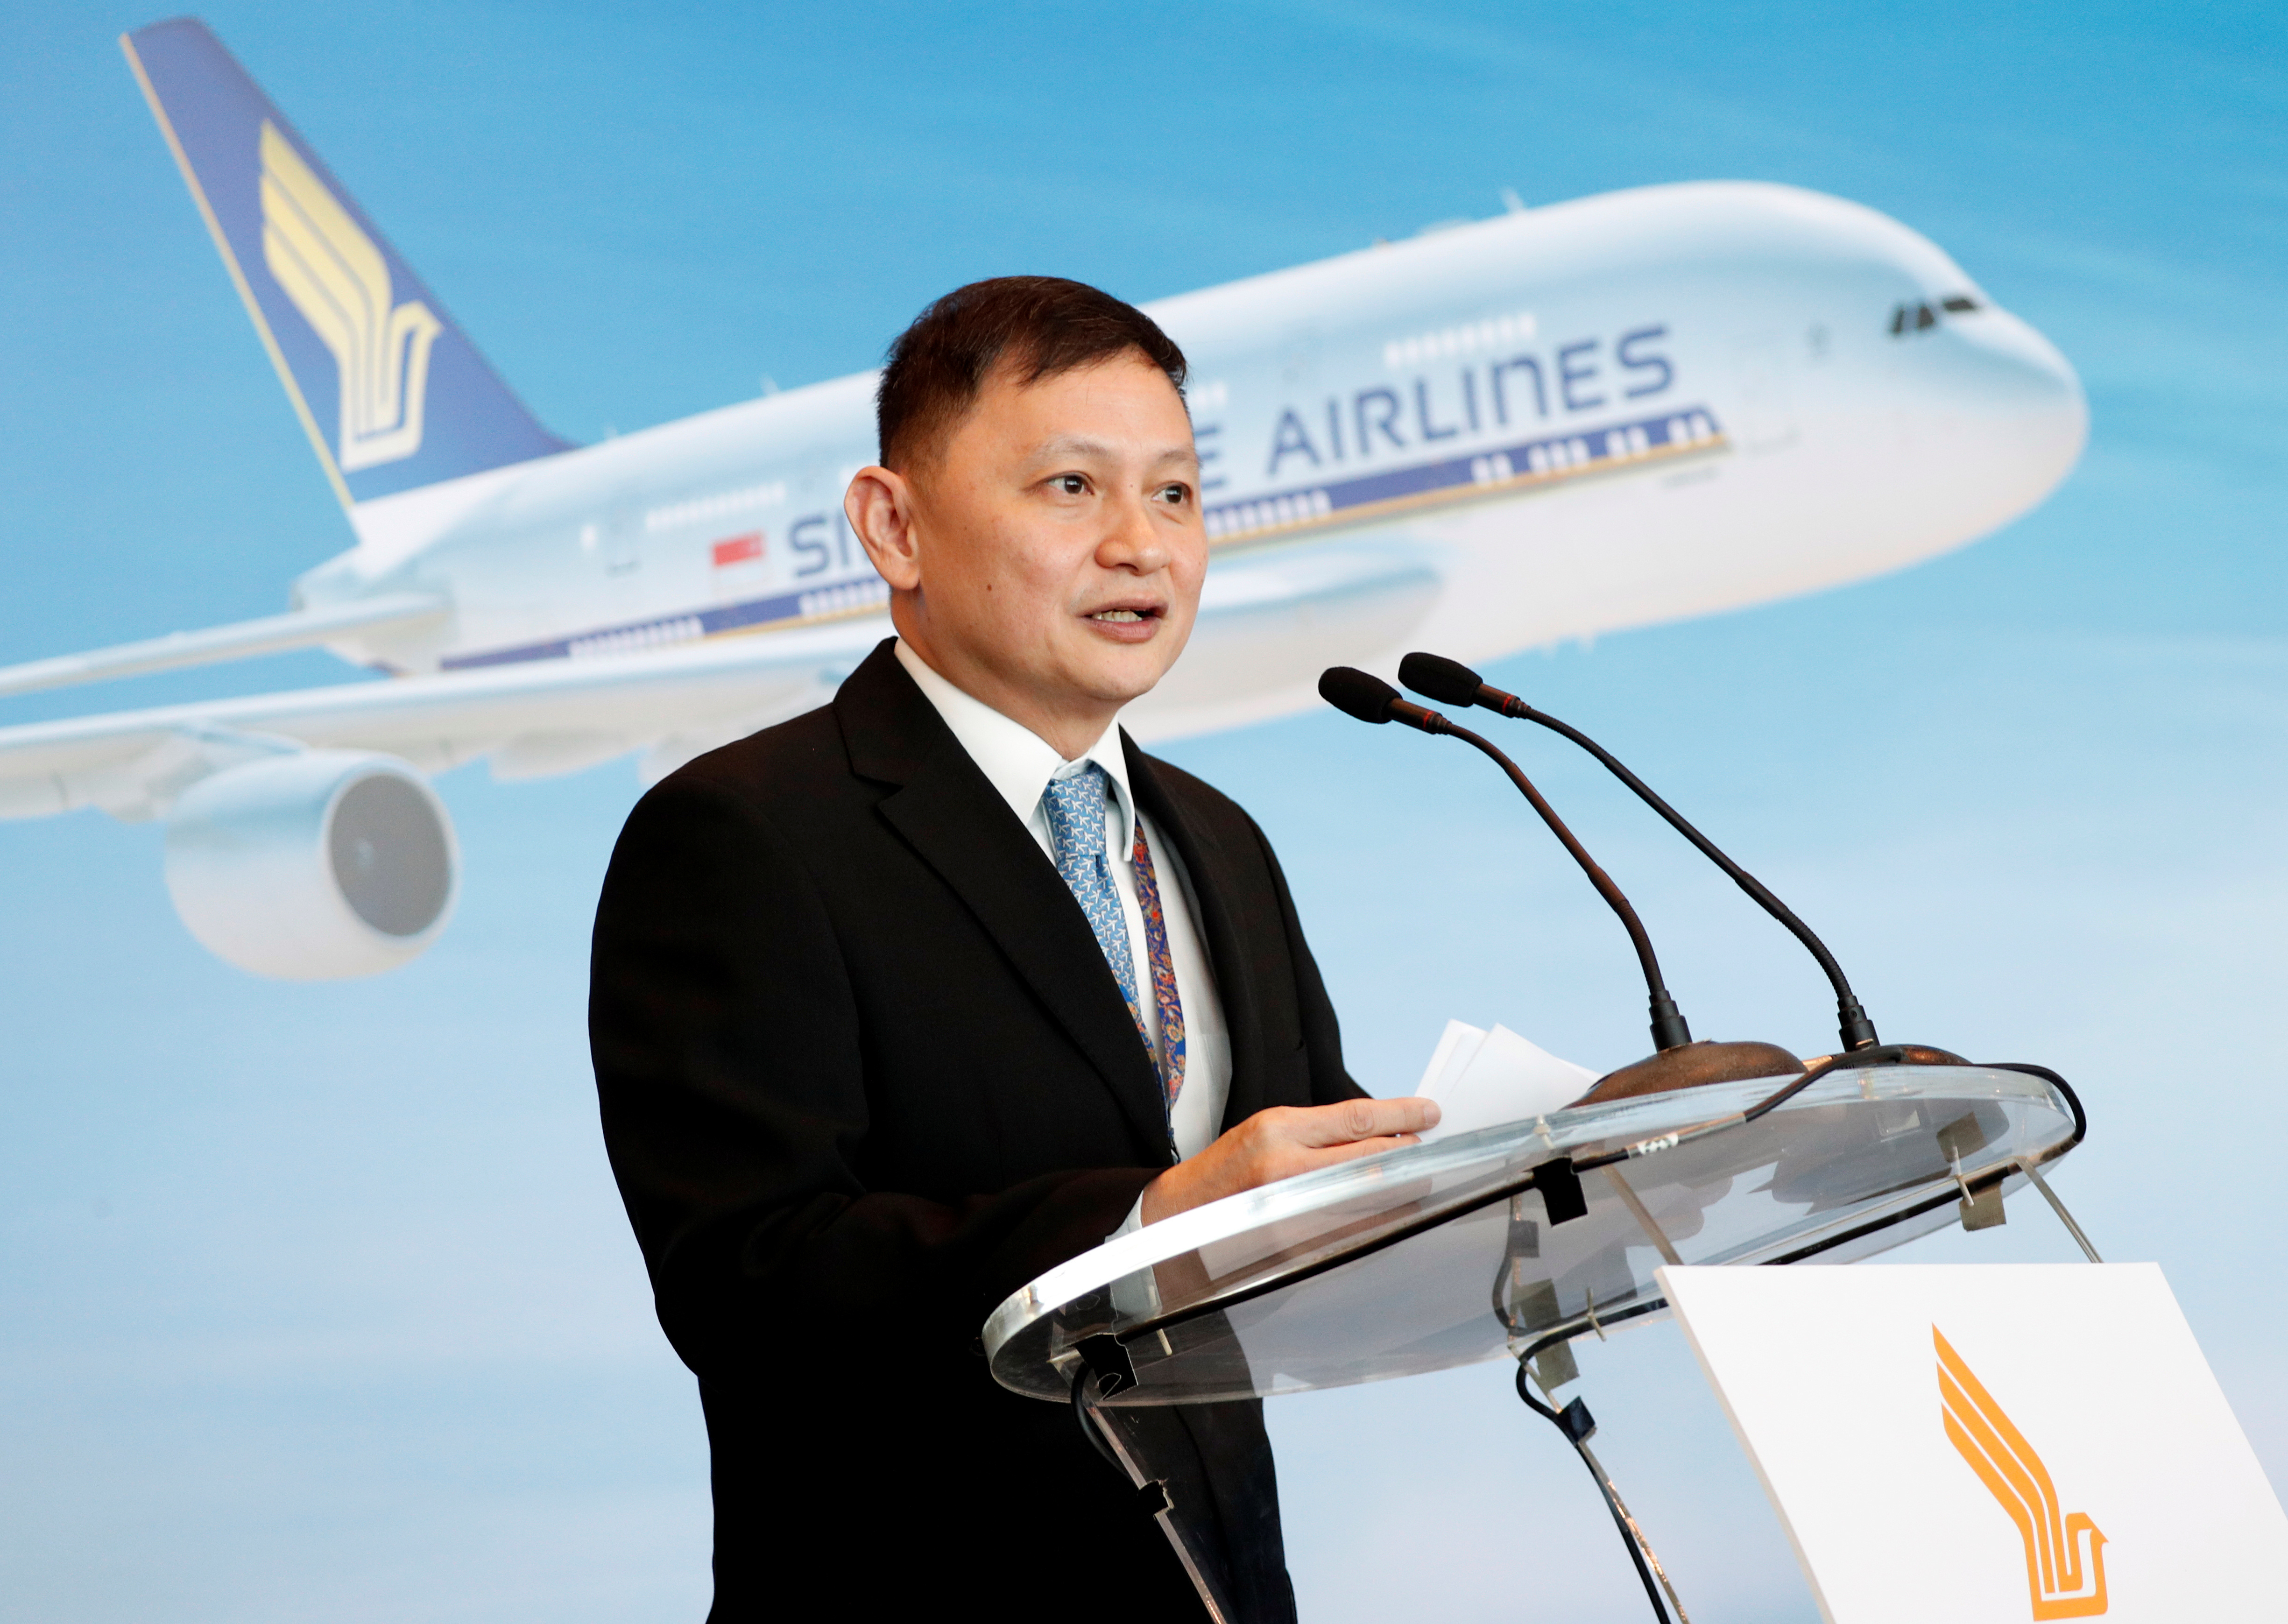 Singapore Airlines CEO Goh Choon Phong speaks before a tour of Singapore Airlines' A380 fitted with newly launched cabin products at Changi Airport in Singapore